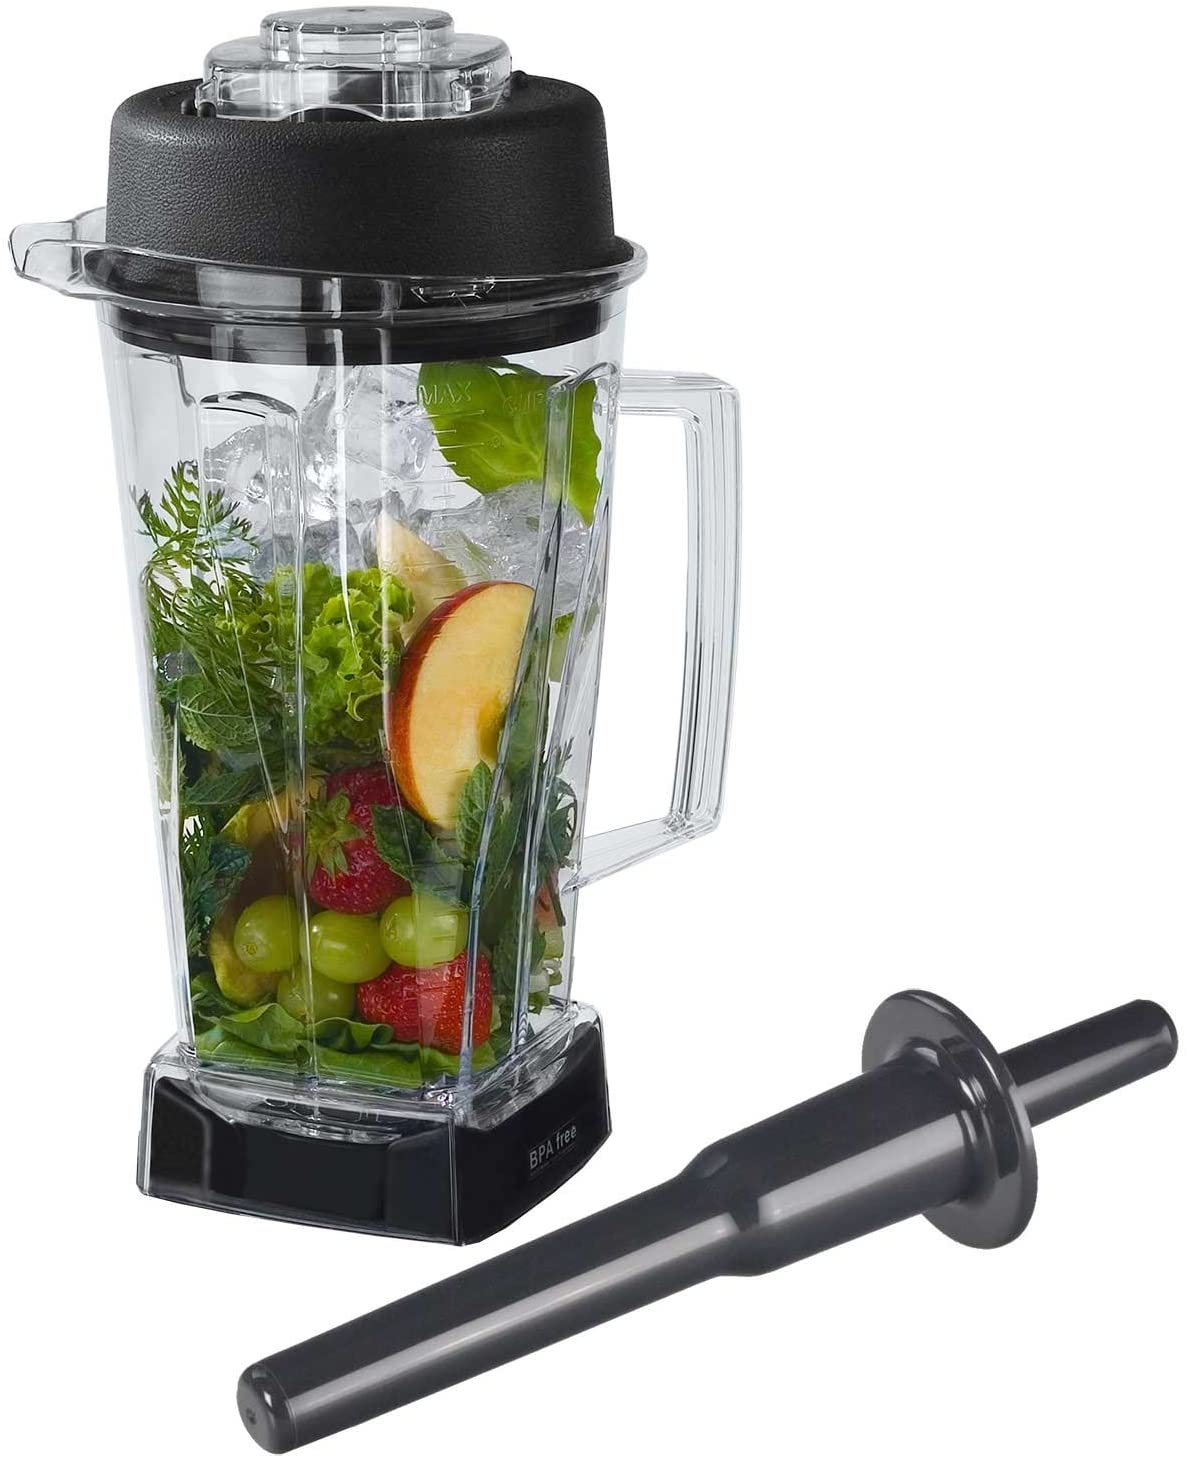 yayago 2 Litre BPA FREE Smoothie Maker Power Mixer Blender Icecrusher with Cutting Knife, Pestle and Lid Replacement for cultivation